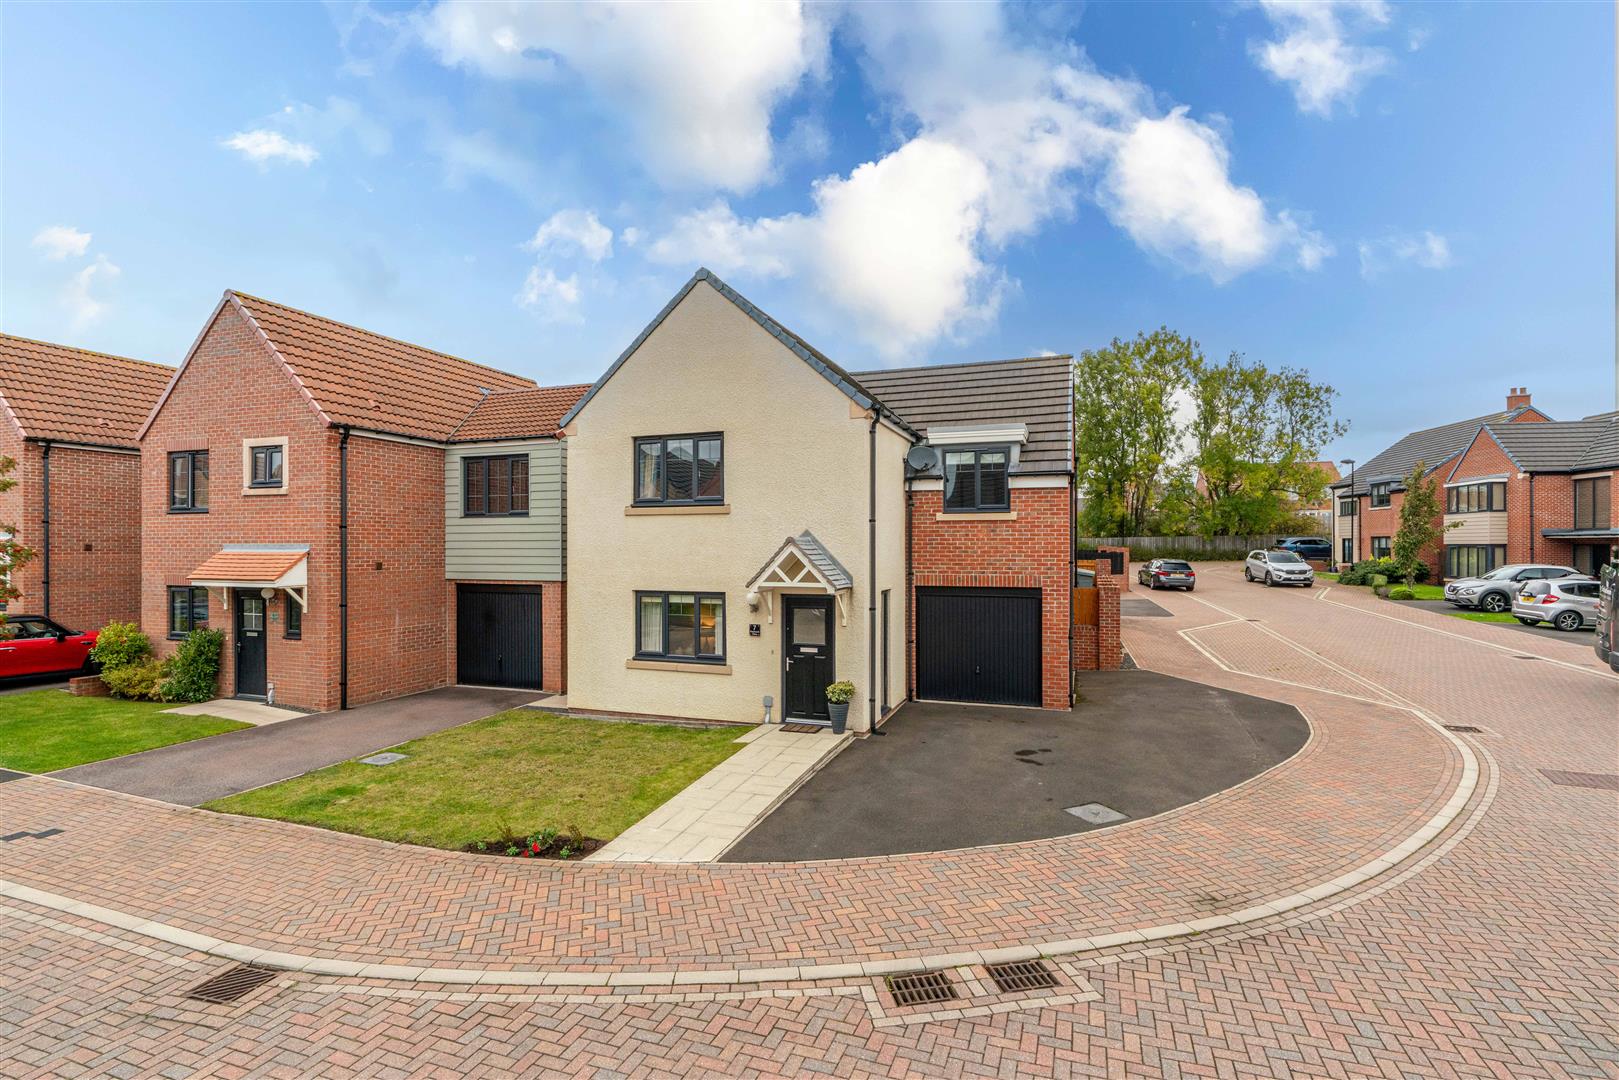 4 bed detached house for sale in Fenchurch Close, Wideopen, NE13